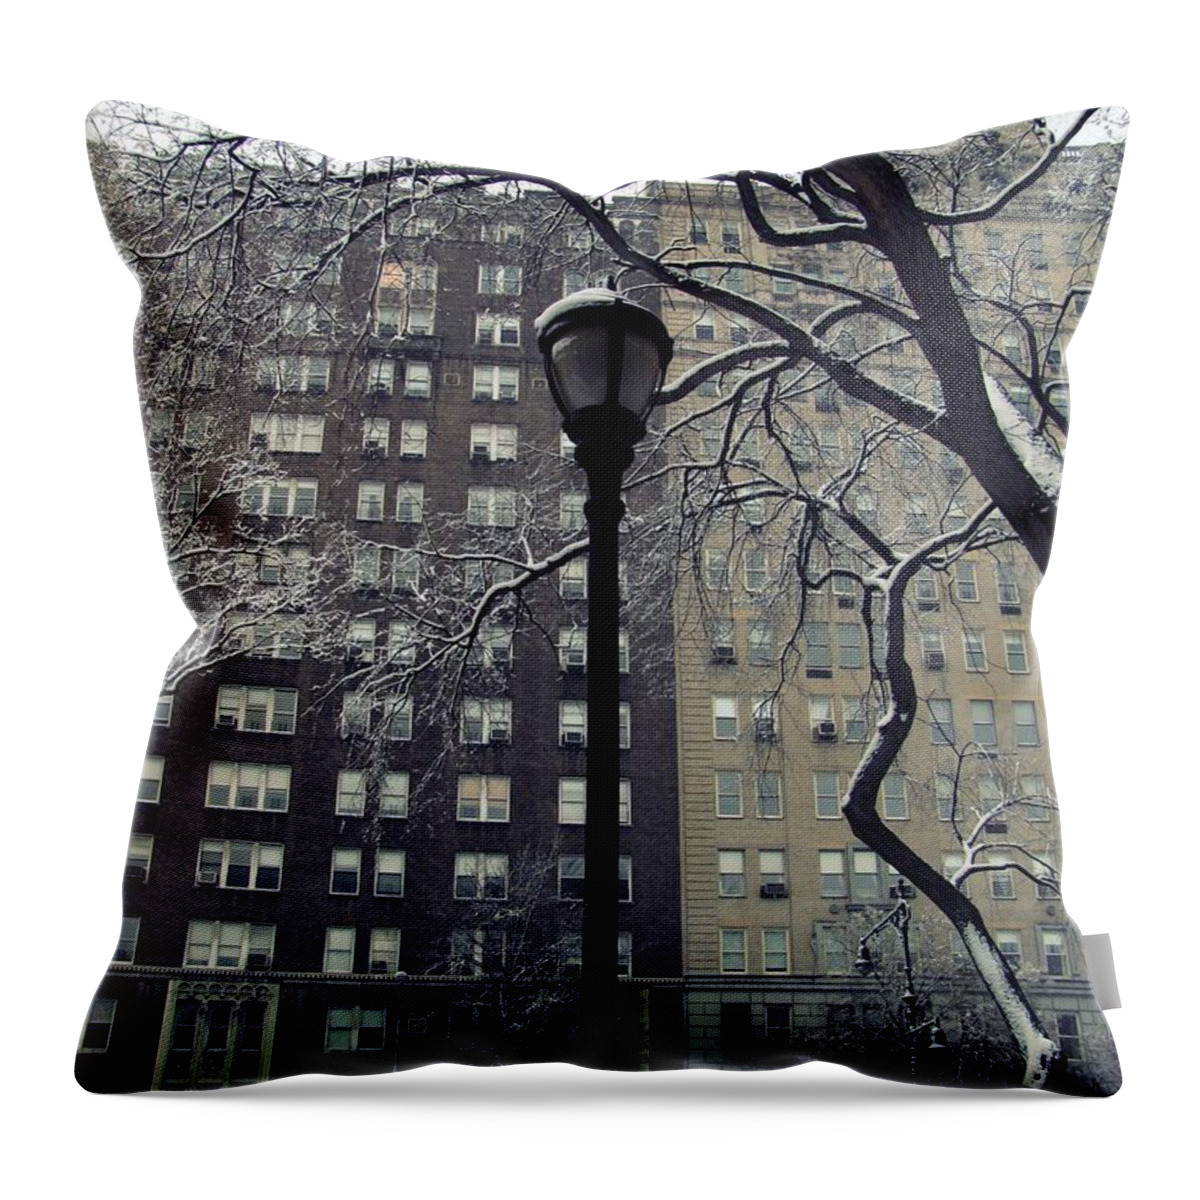 Snow Throw Pillow featuring the photograph Snowy Day In New York by Leah Mihuc